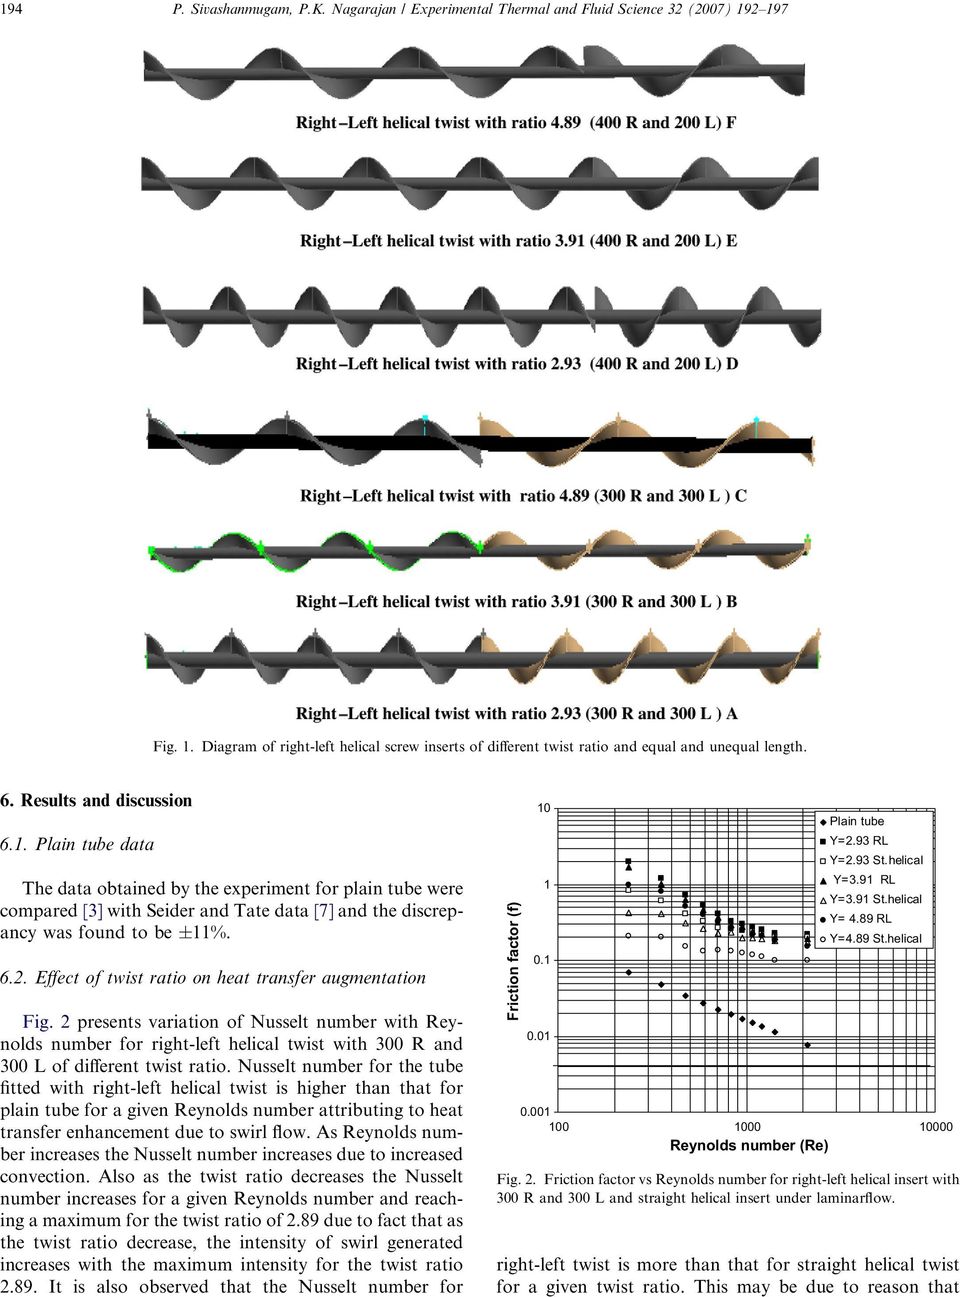 Effect of twist ratio on heat transfer augmentation Fig. 2 presents variation of Nusselt number with Reynolds number for right-left helical twist with 300 R and 300 L of different twist ratio.